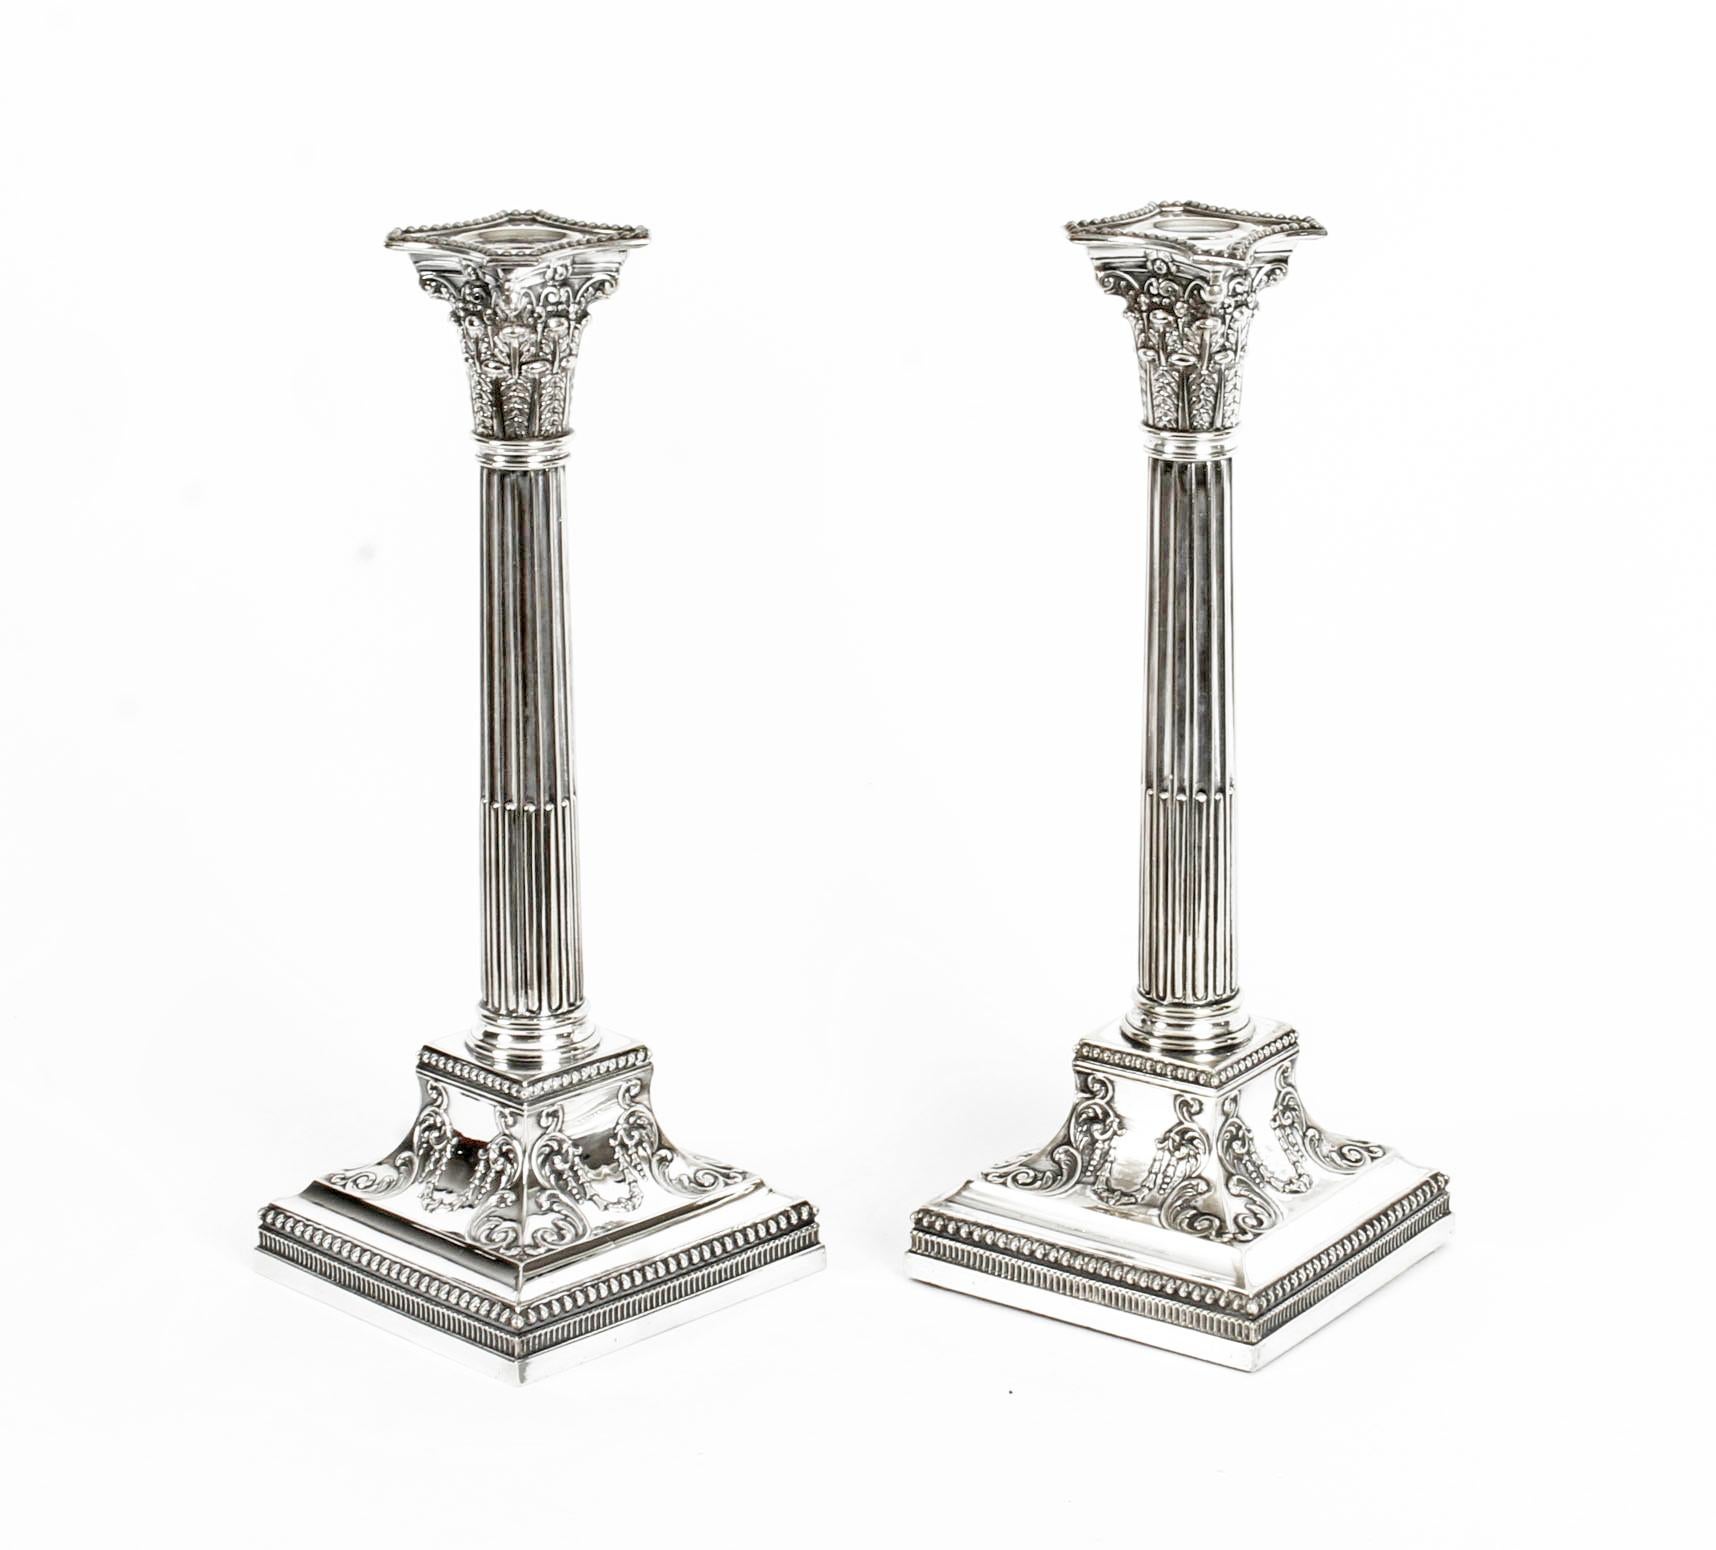 Antique Pair of Silver Plated Candlesticks by James Dixon, 19th Century 12